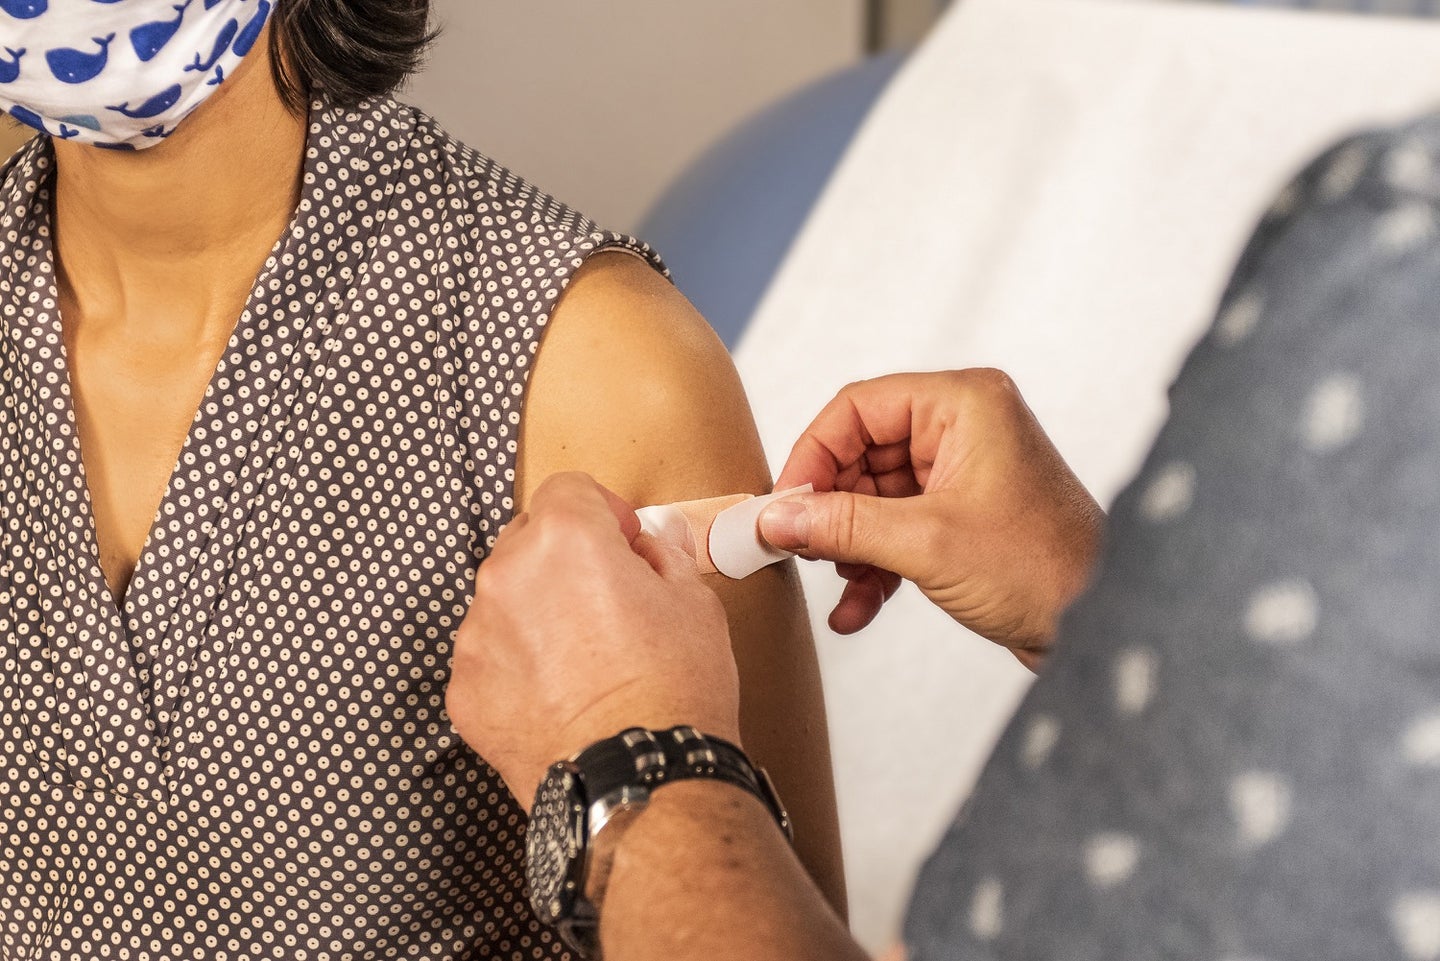 a woman wearing a mask finished receiving a shot and is getting a bandaid on her arm